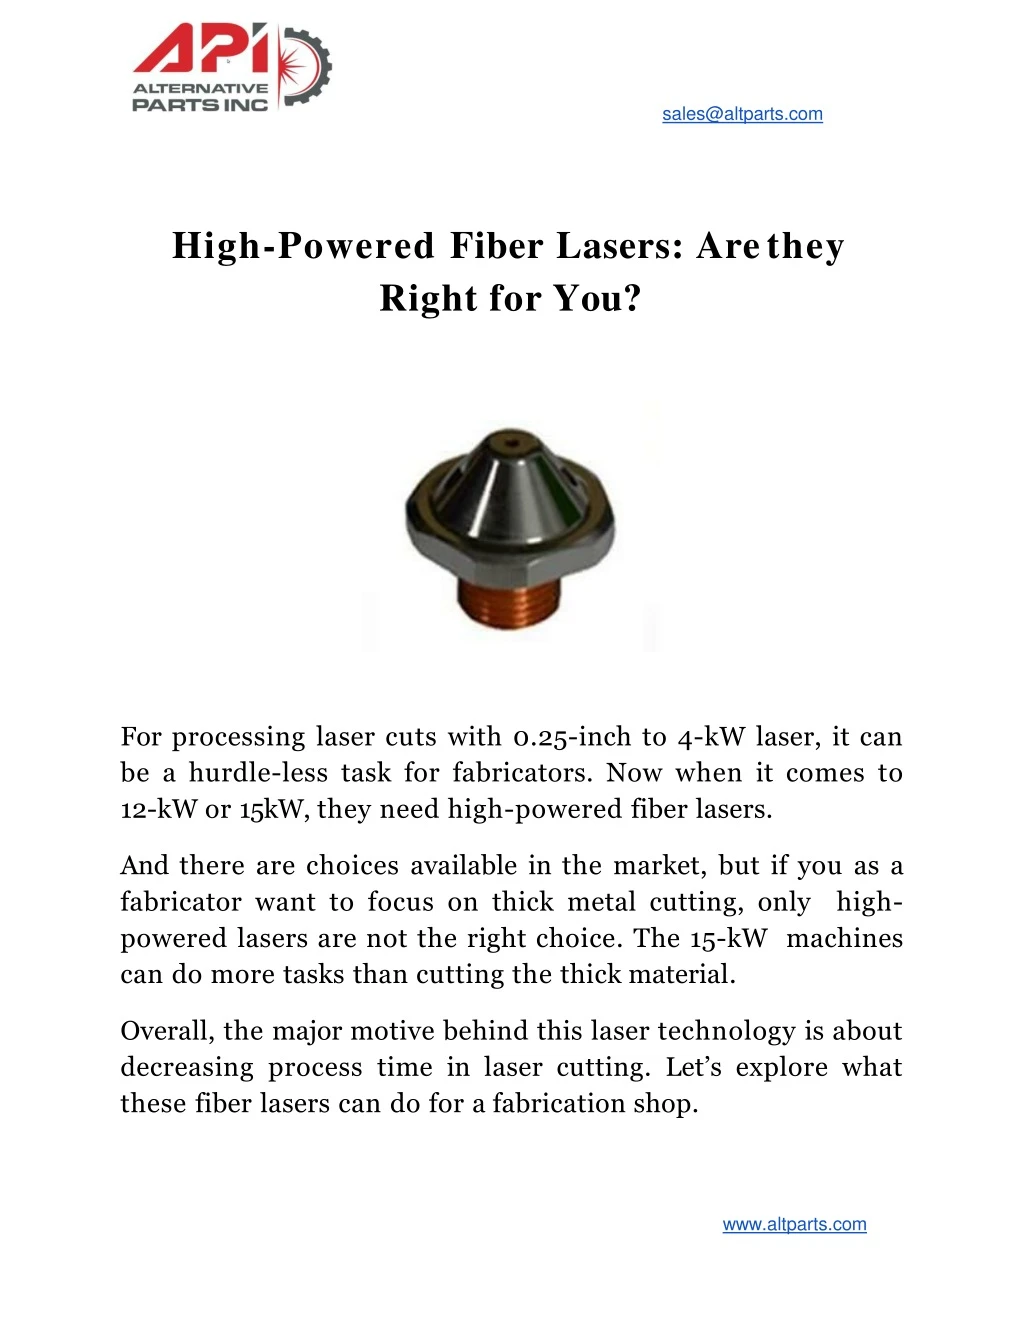 high powered fiber lasers are they right for you